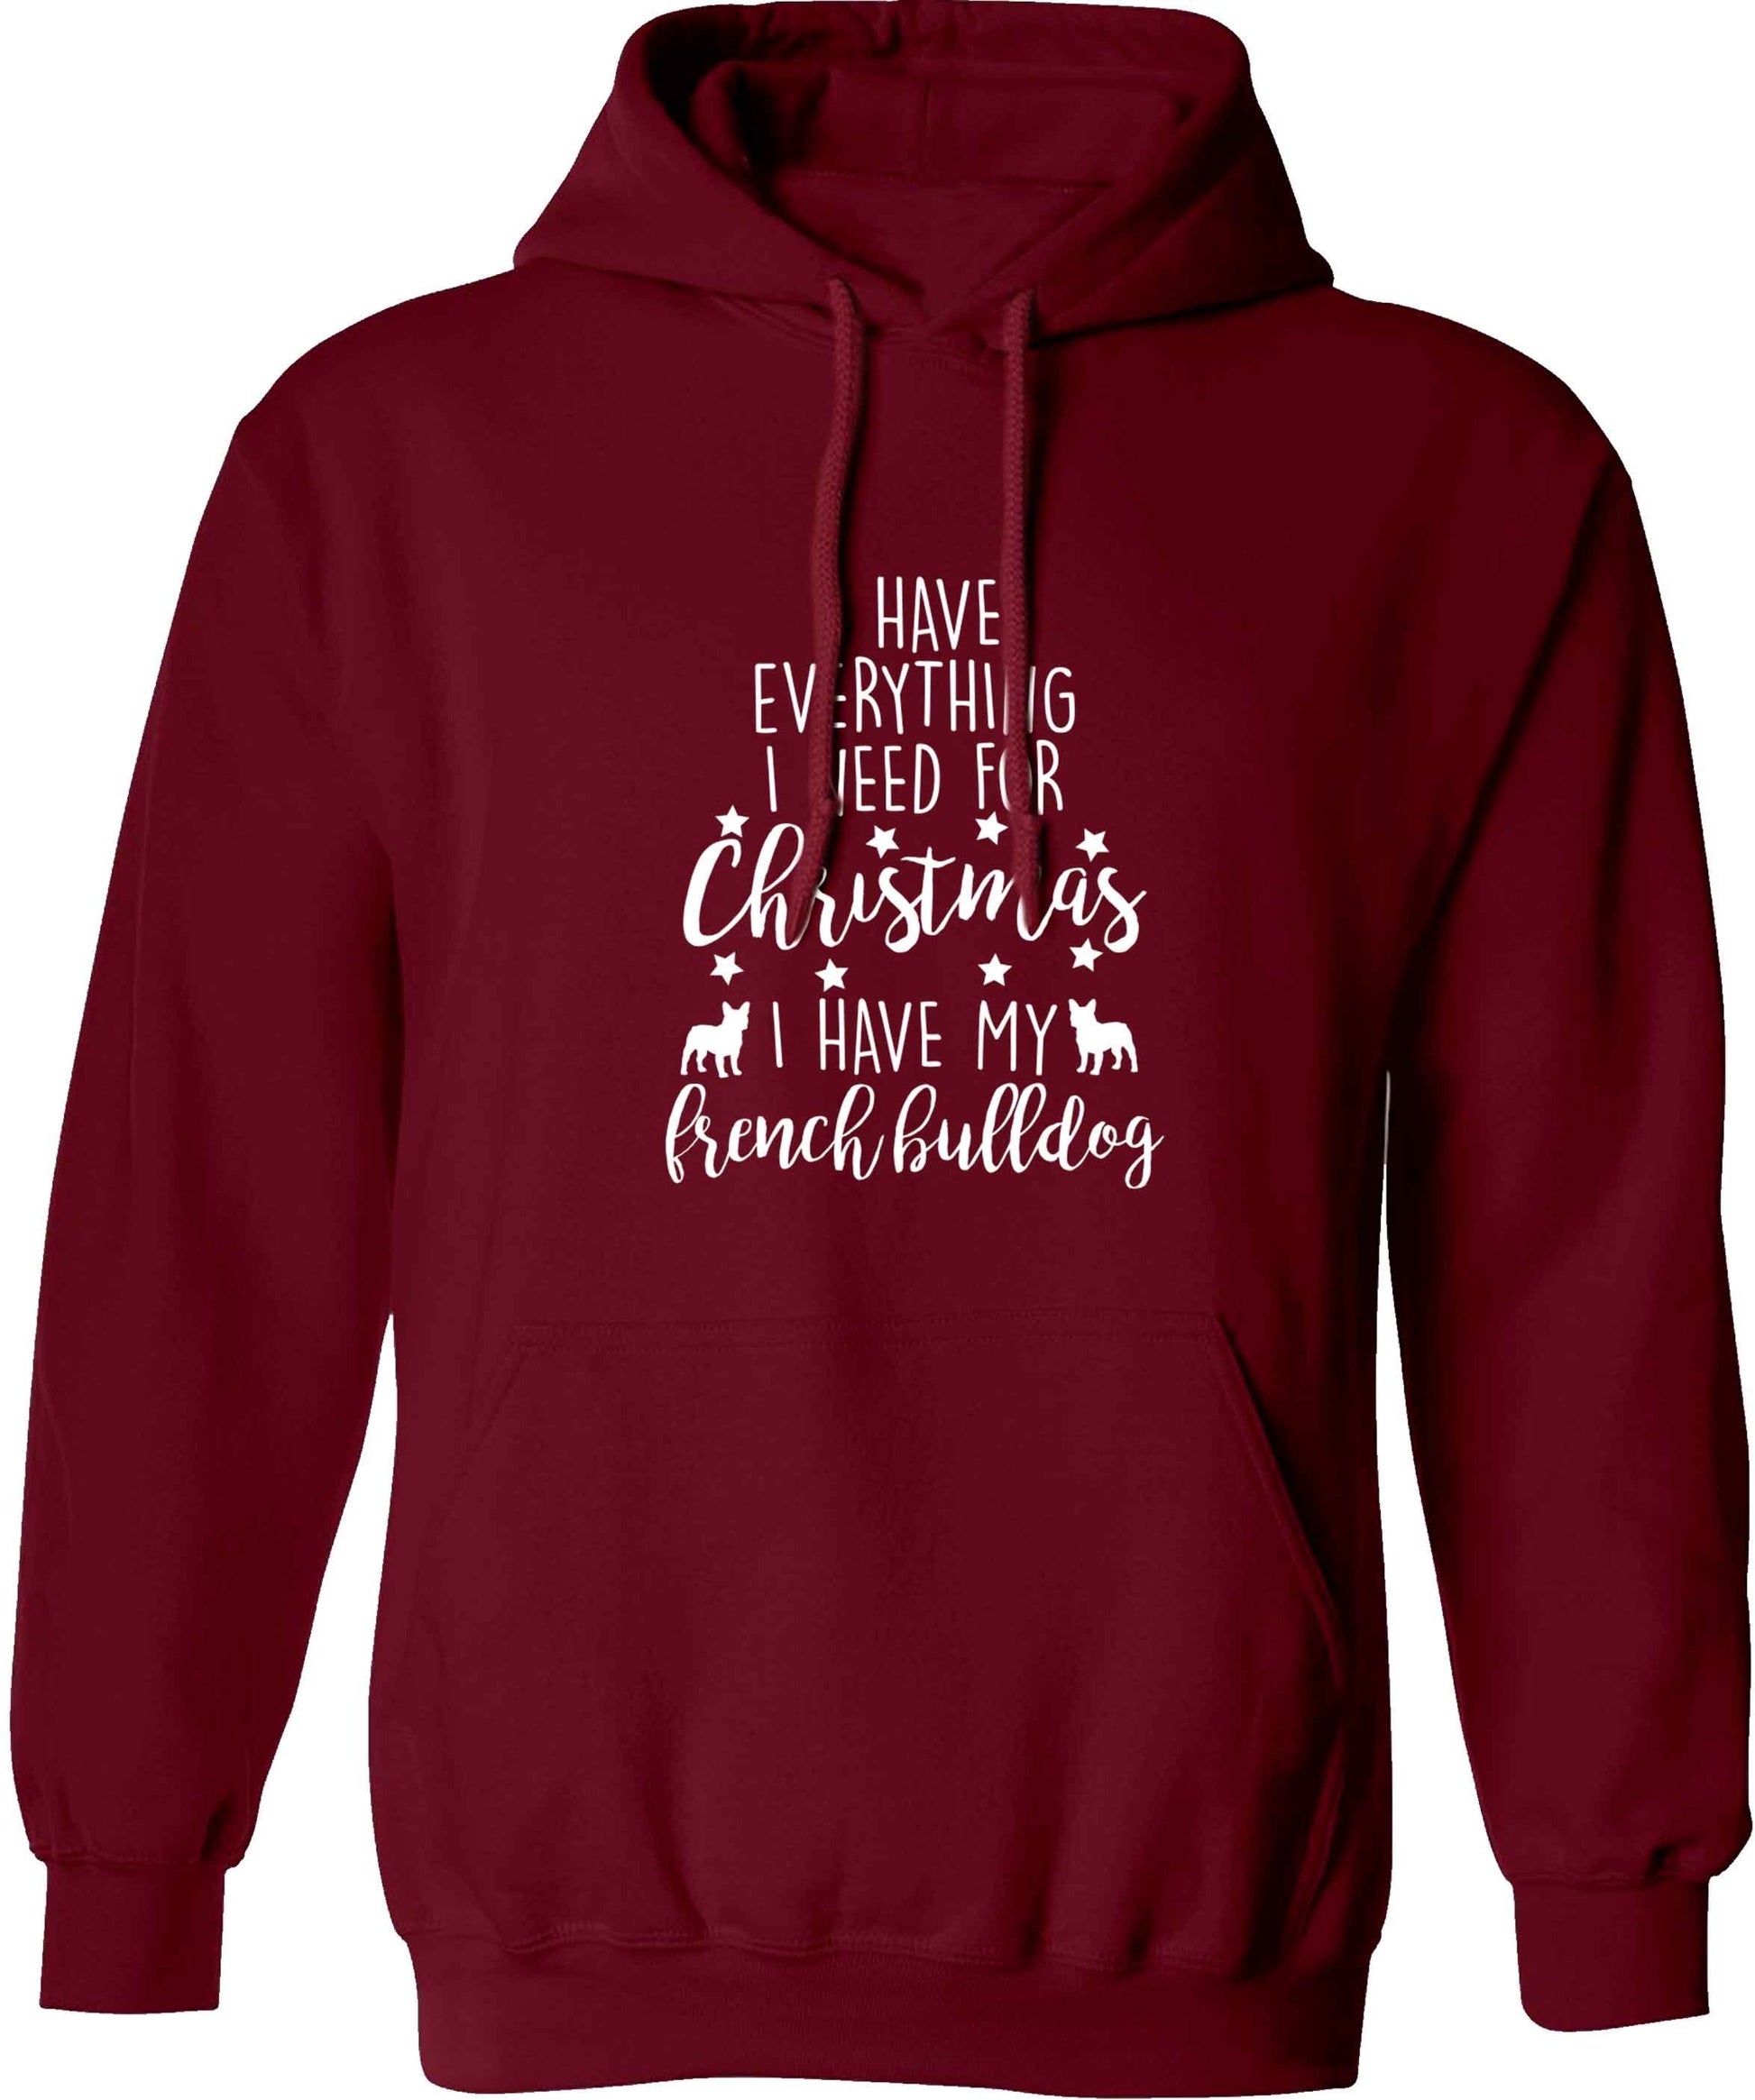 I have everything I need for Christmas I have my french bulldog adults unisex maroon hoodie 2XL